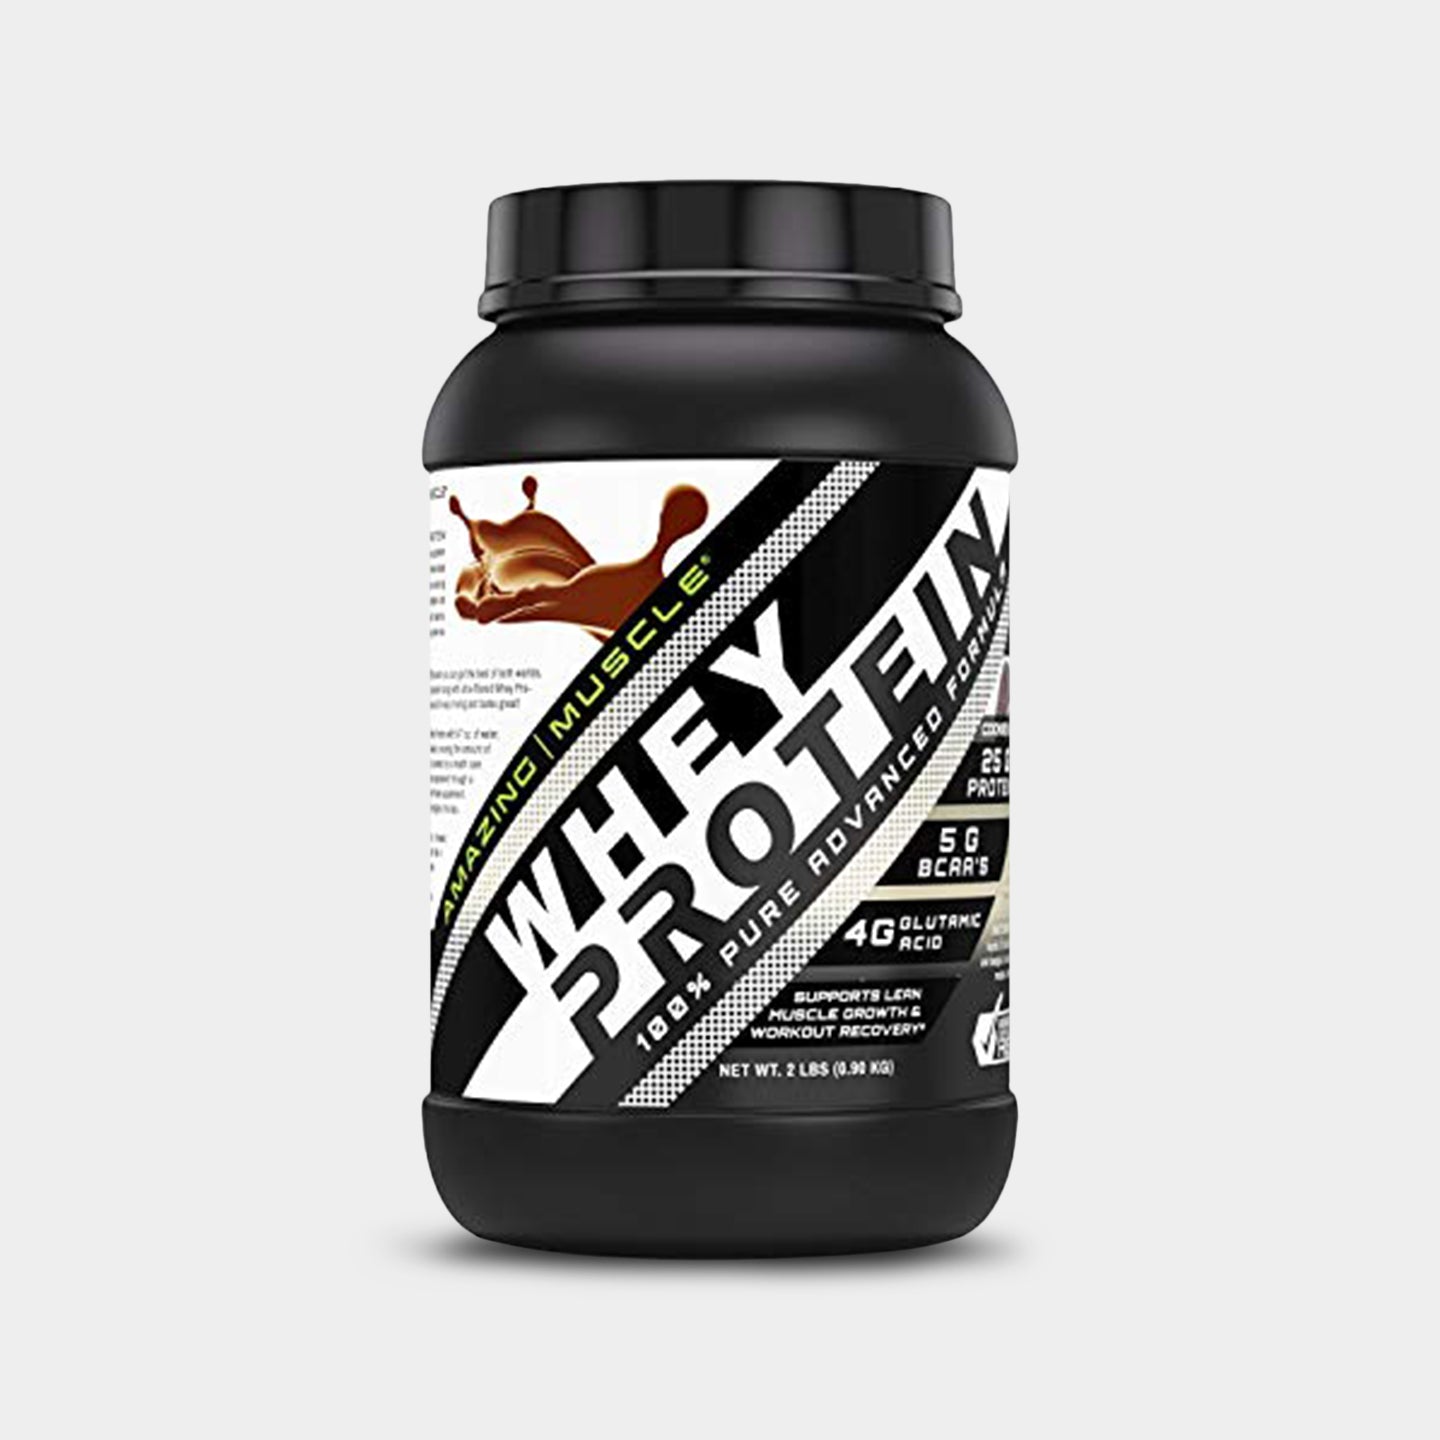 Amazing Muscle Whey Protein, Cookies & Cream, 2 Lbs A1